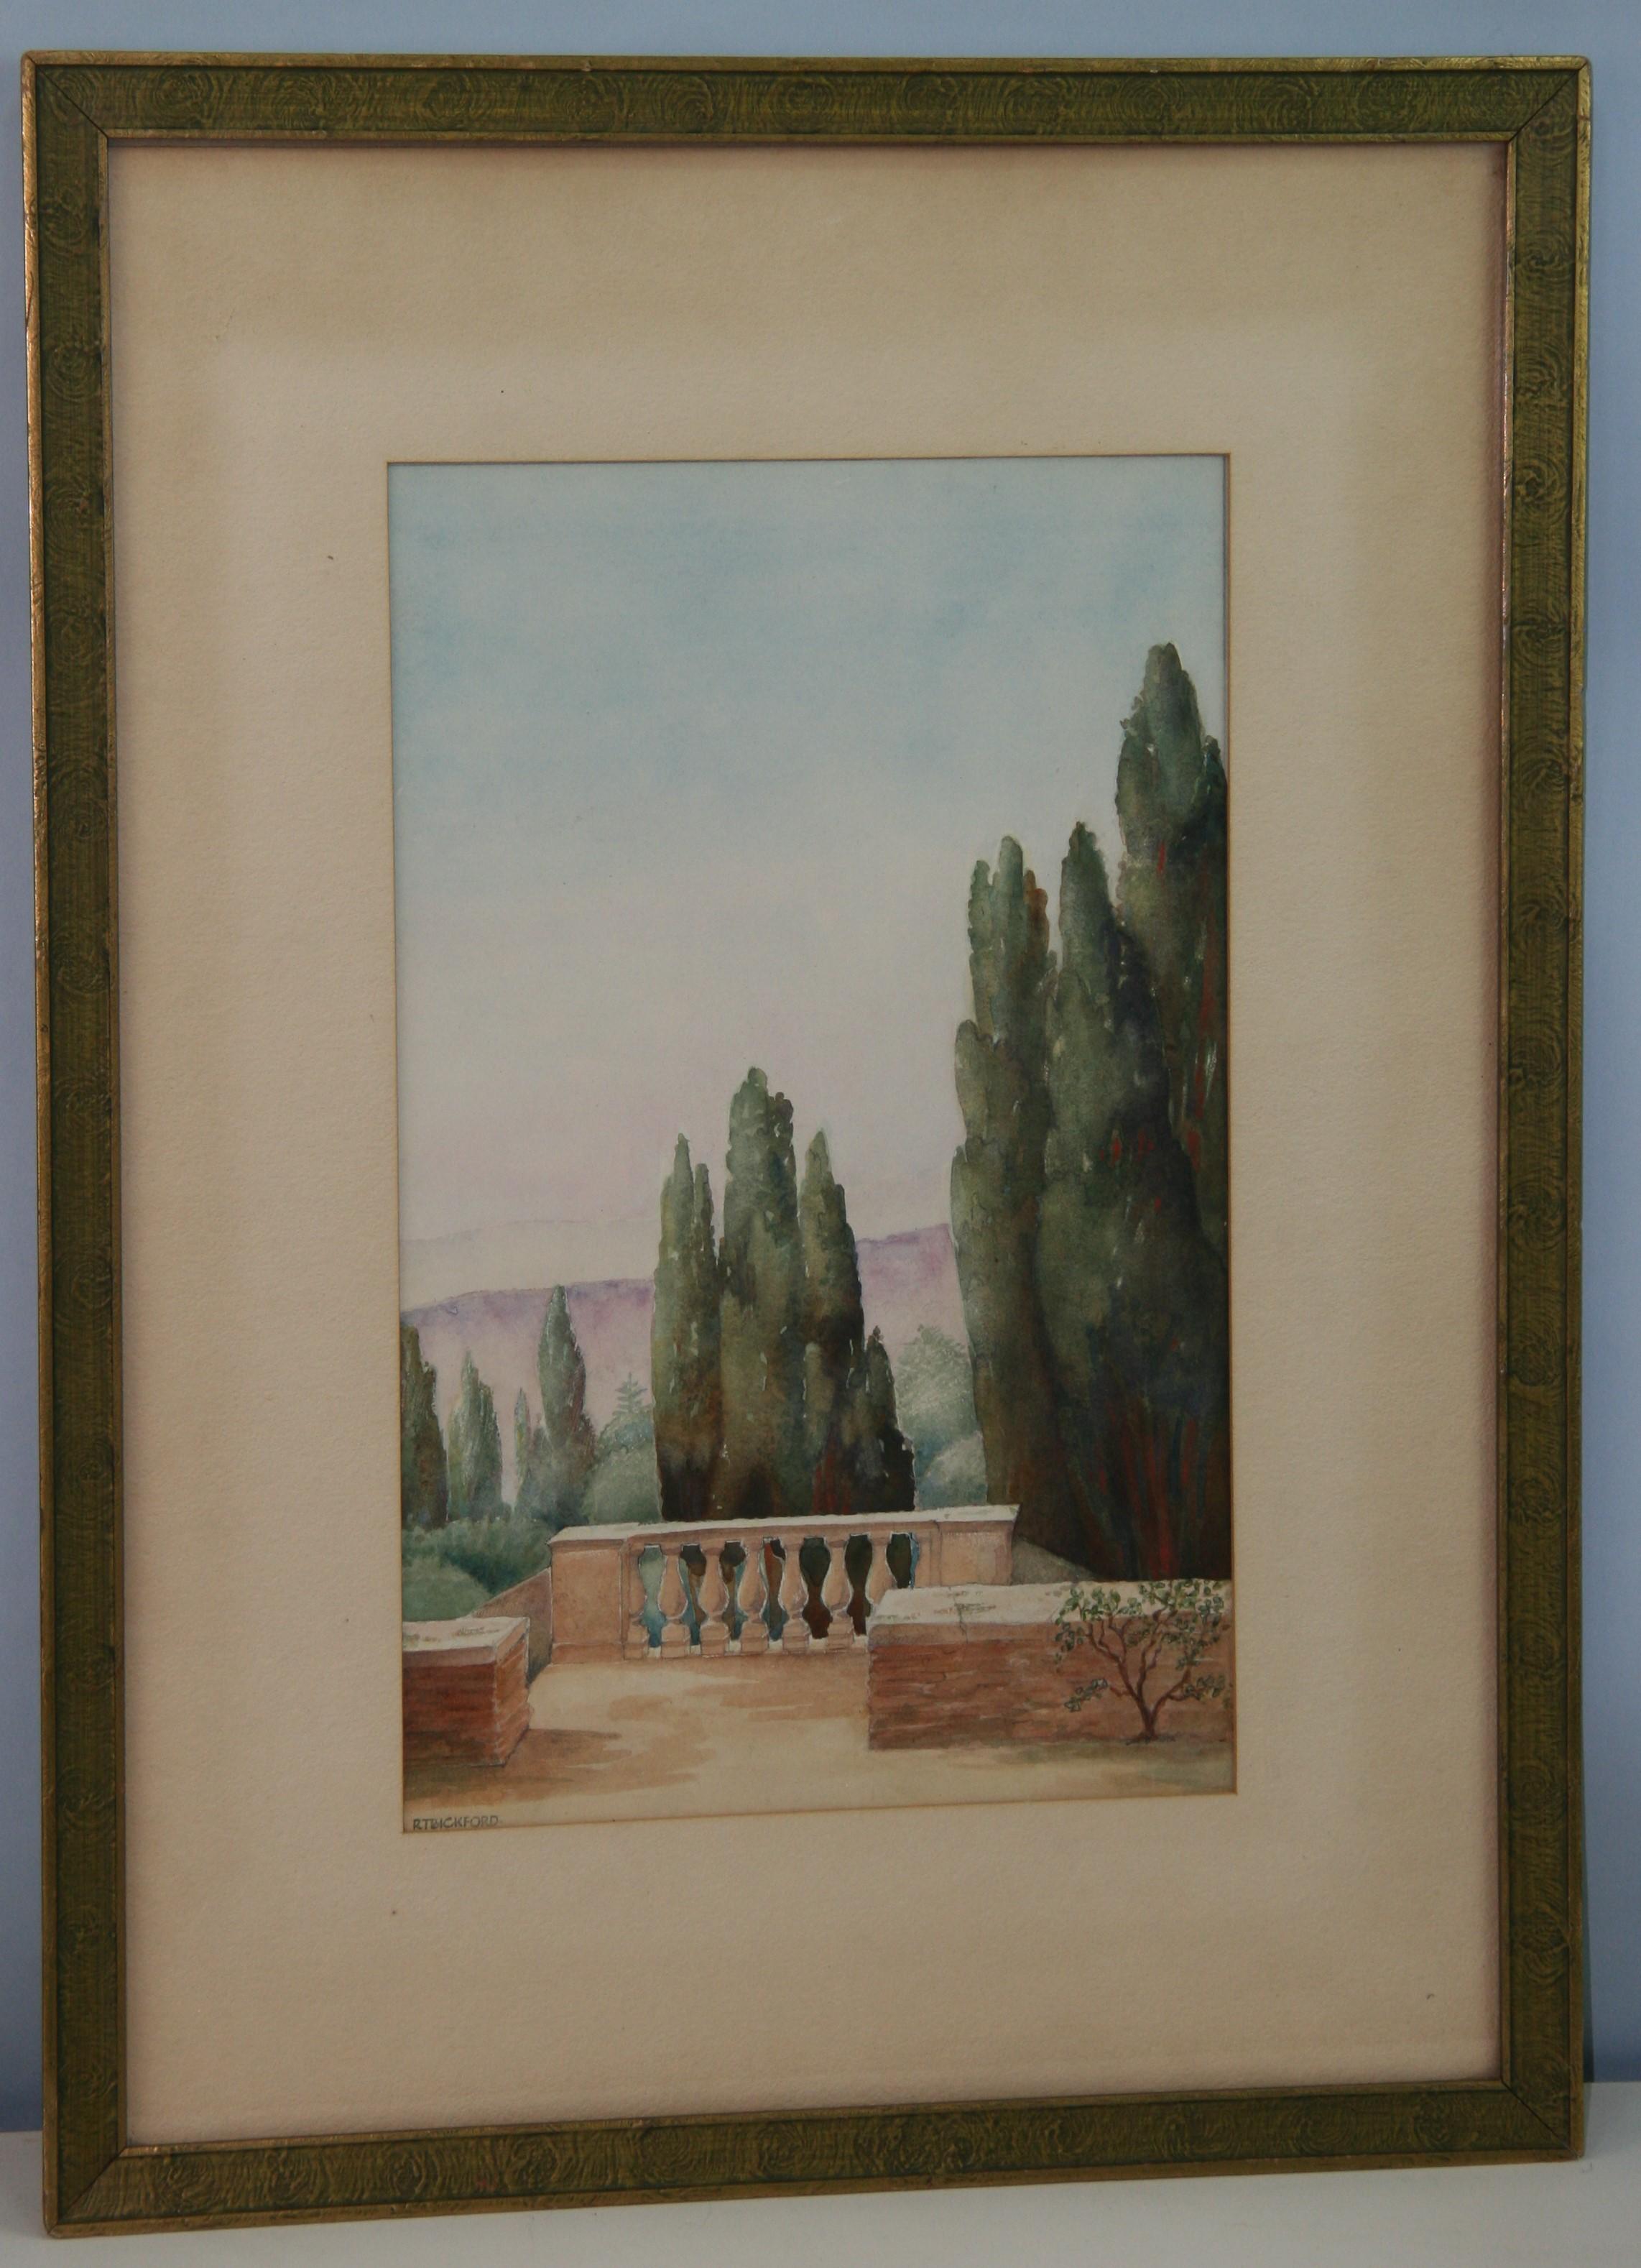 4028 Italian Tuscan landscape watercolor in a period frame
Image size 9x14